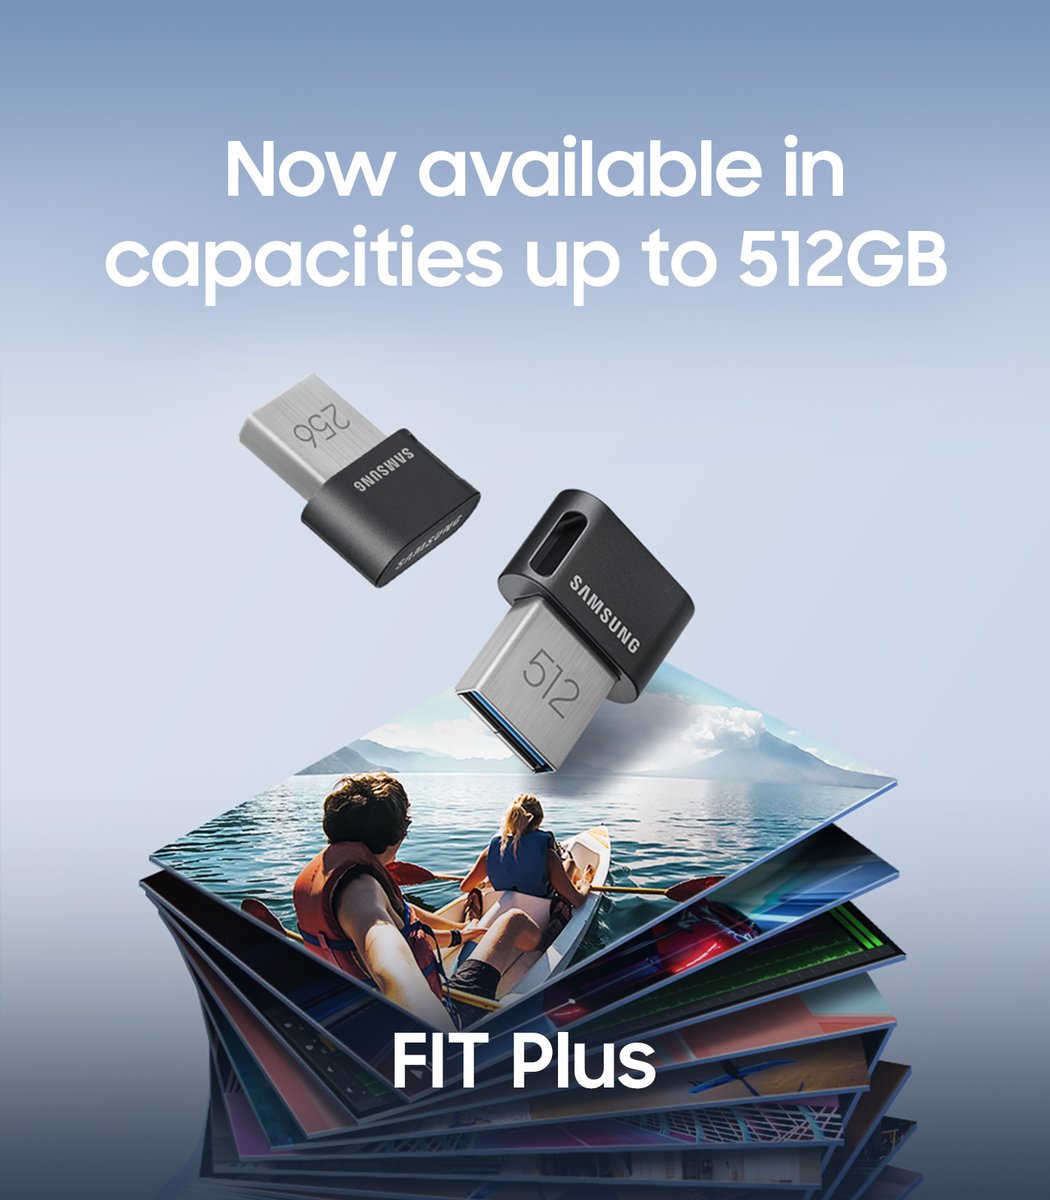 Now available in capacities up to 512GB, the BAR Plus and FIT Plus are ample enough to fit 170,000+ 4K images, up to 24 hours of 4K video, or enough songs to fill a month-long playlist. Learn more. smsng.co/SSD